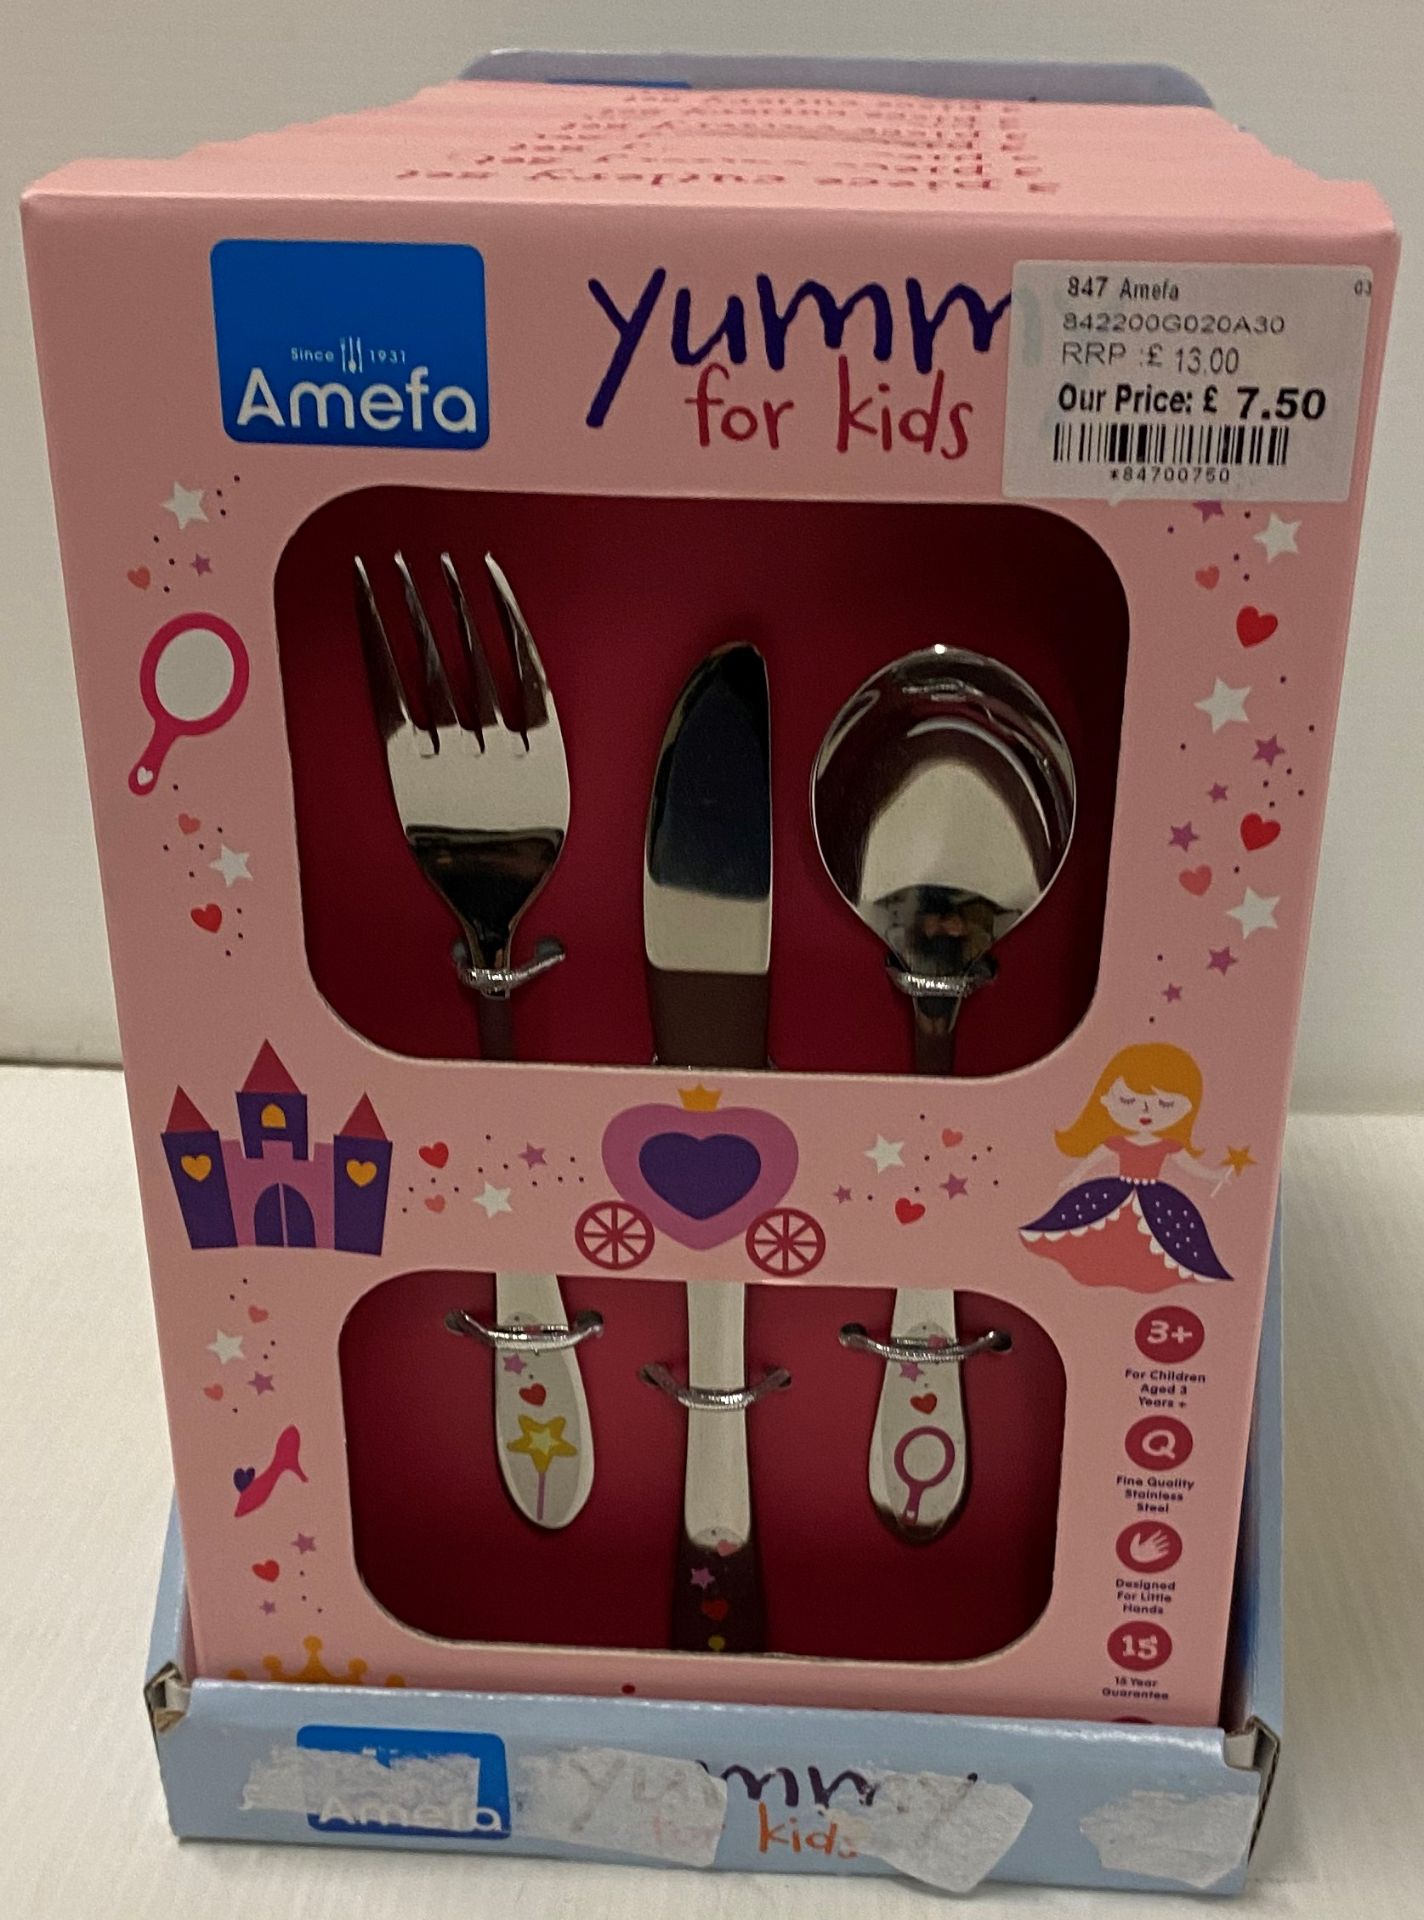 10 x Yummy for Kids - Princess - 3 piece cutlery sets RRP £13.